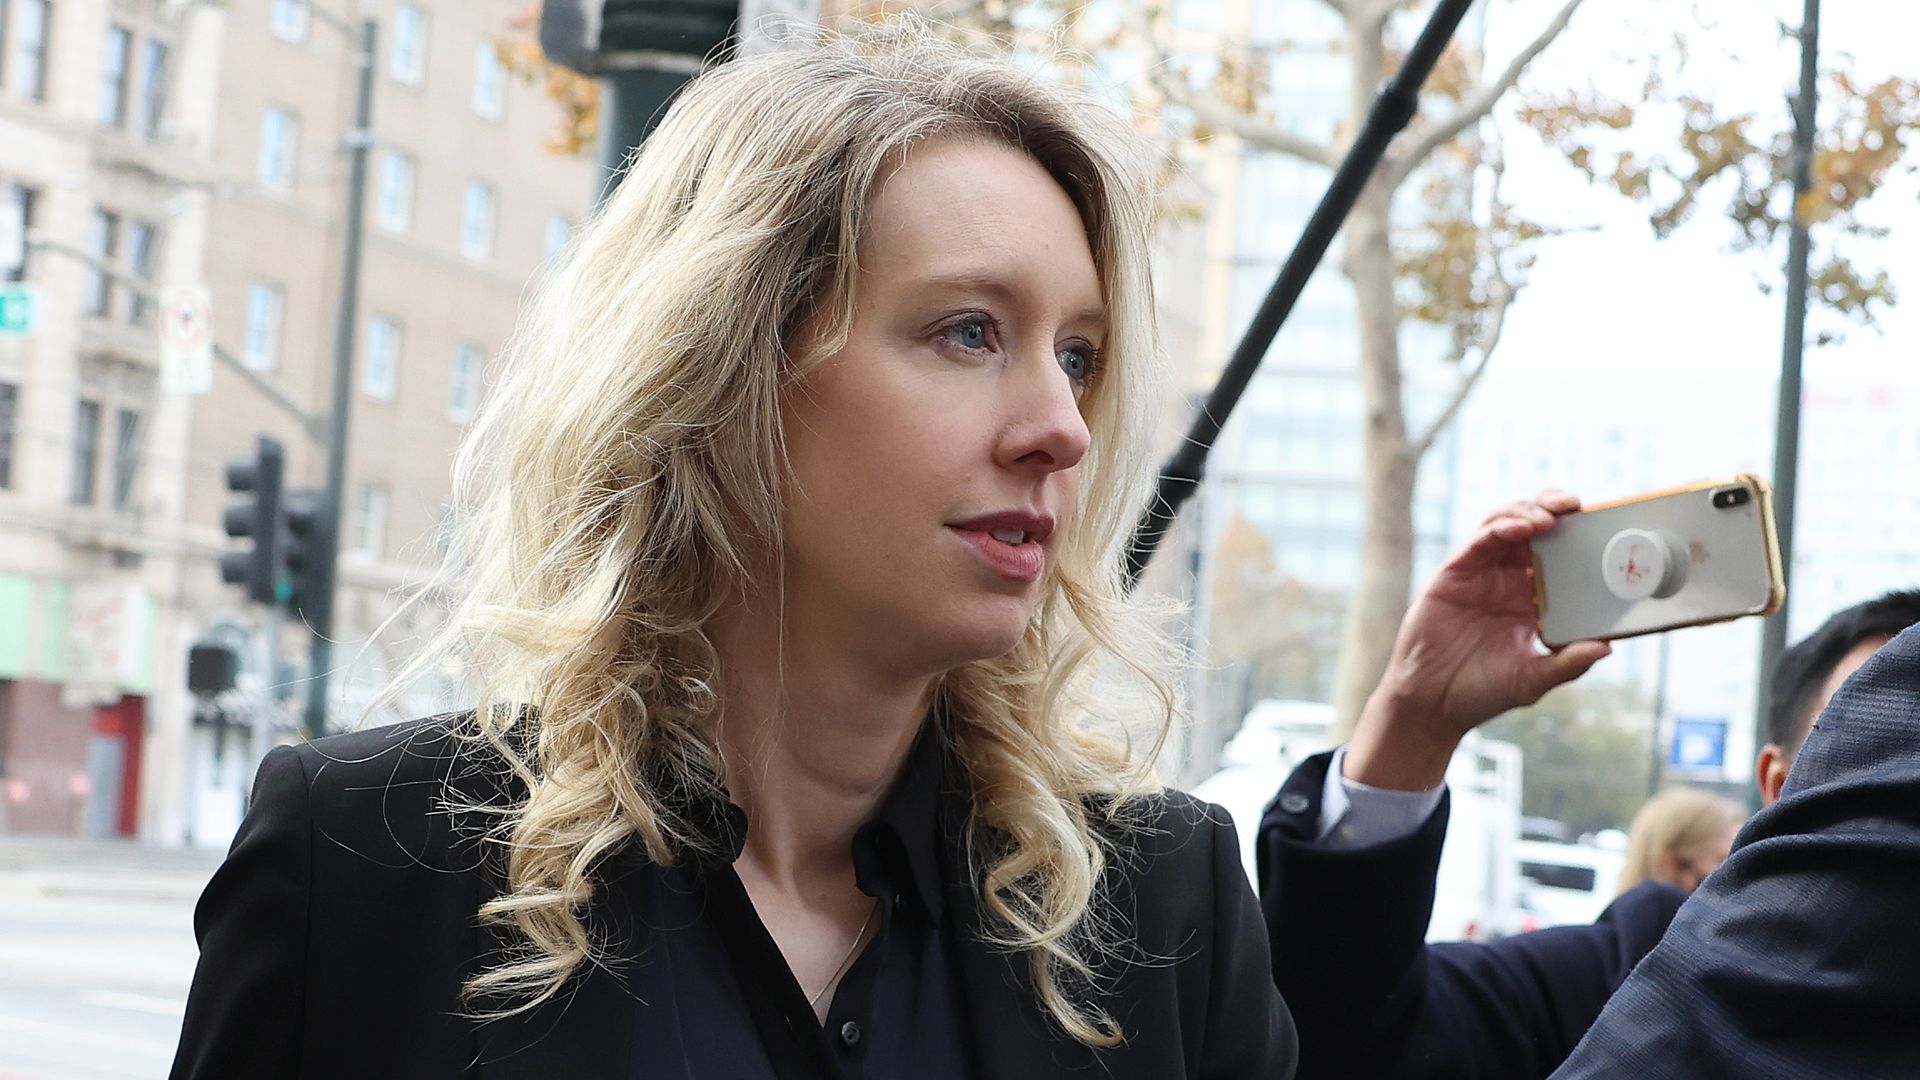 Former Theranos CEO Elizabeth Holmes appeared in federal court for sentencing after being convicted of four counts of fraud for allegedly engaging in a multimillion-dollar scheme to defraud investors in her company Theranos, which offered blood testing la